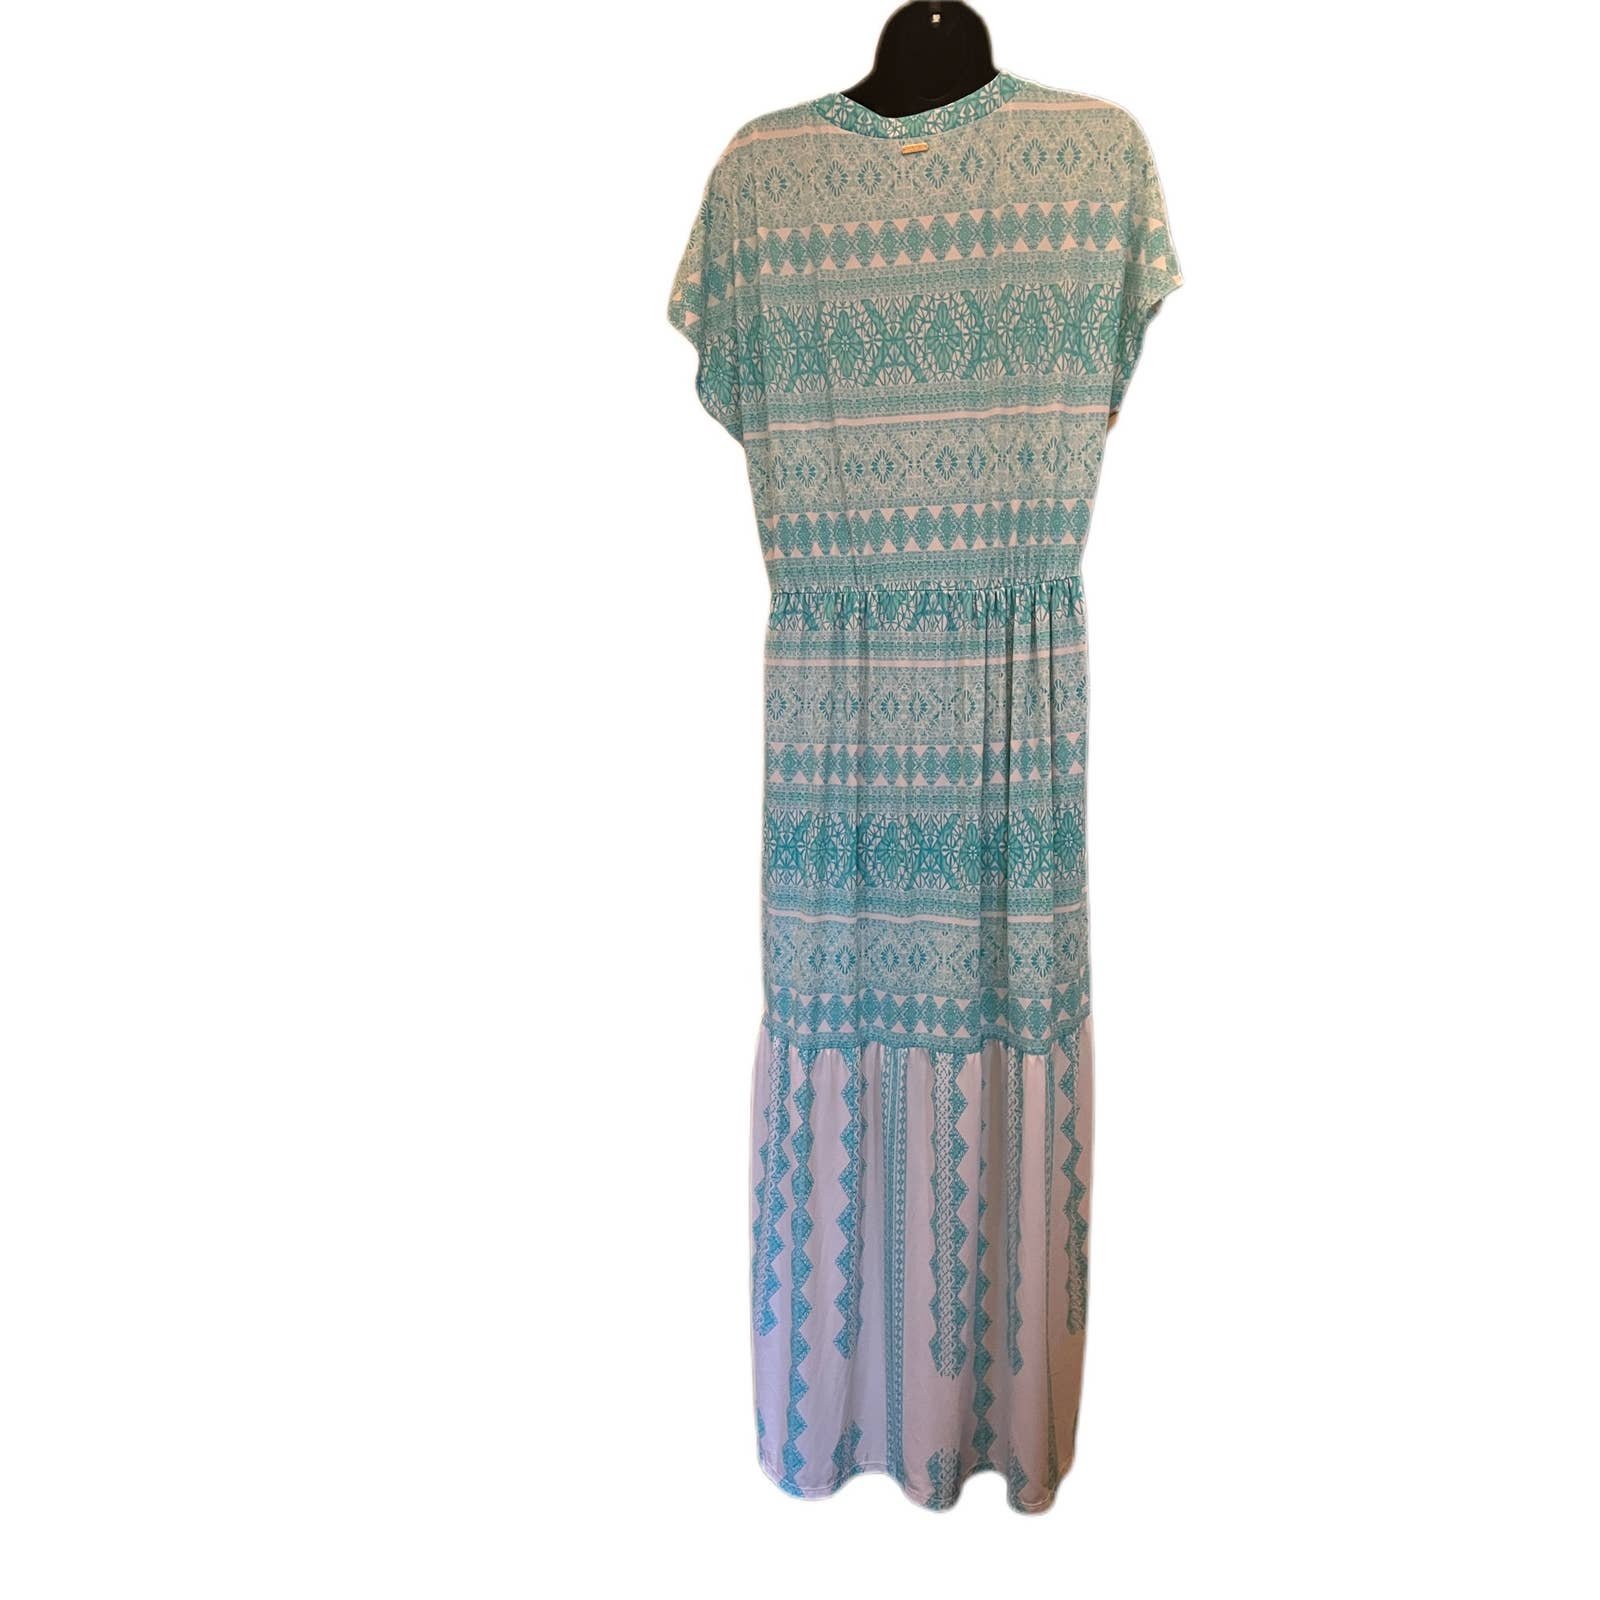 large discount CABANA LIFE Teal and White Button Up Maxi Dress - size XL GmIBUmt3g best sale